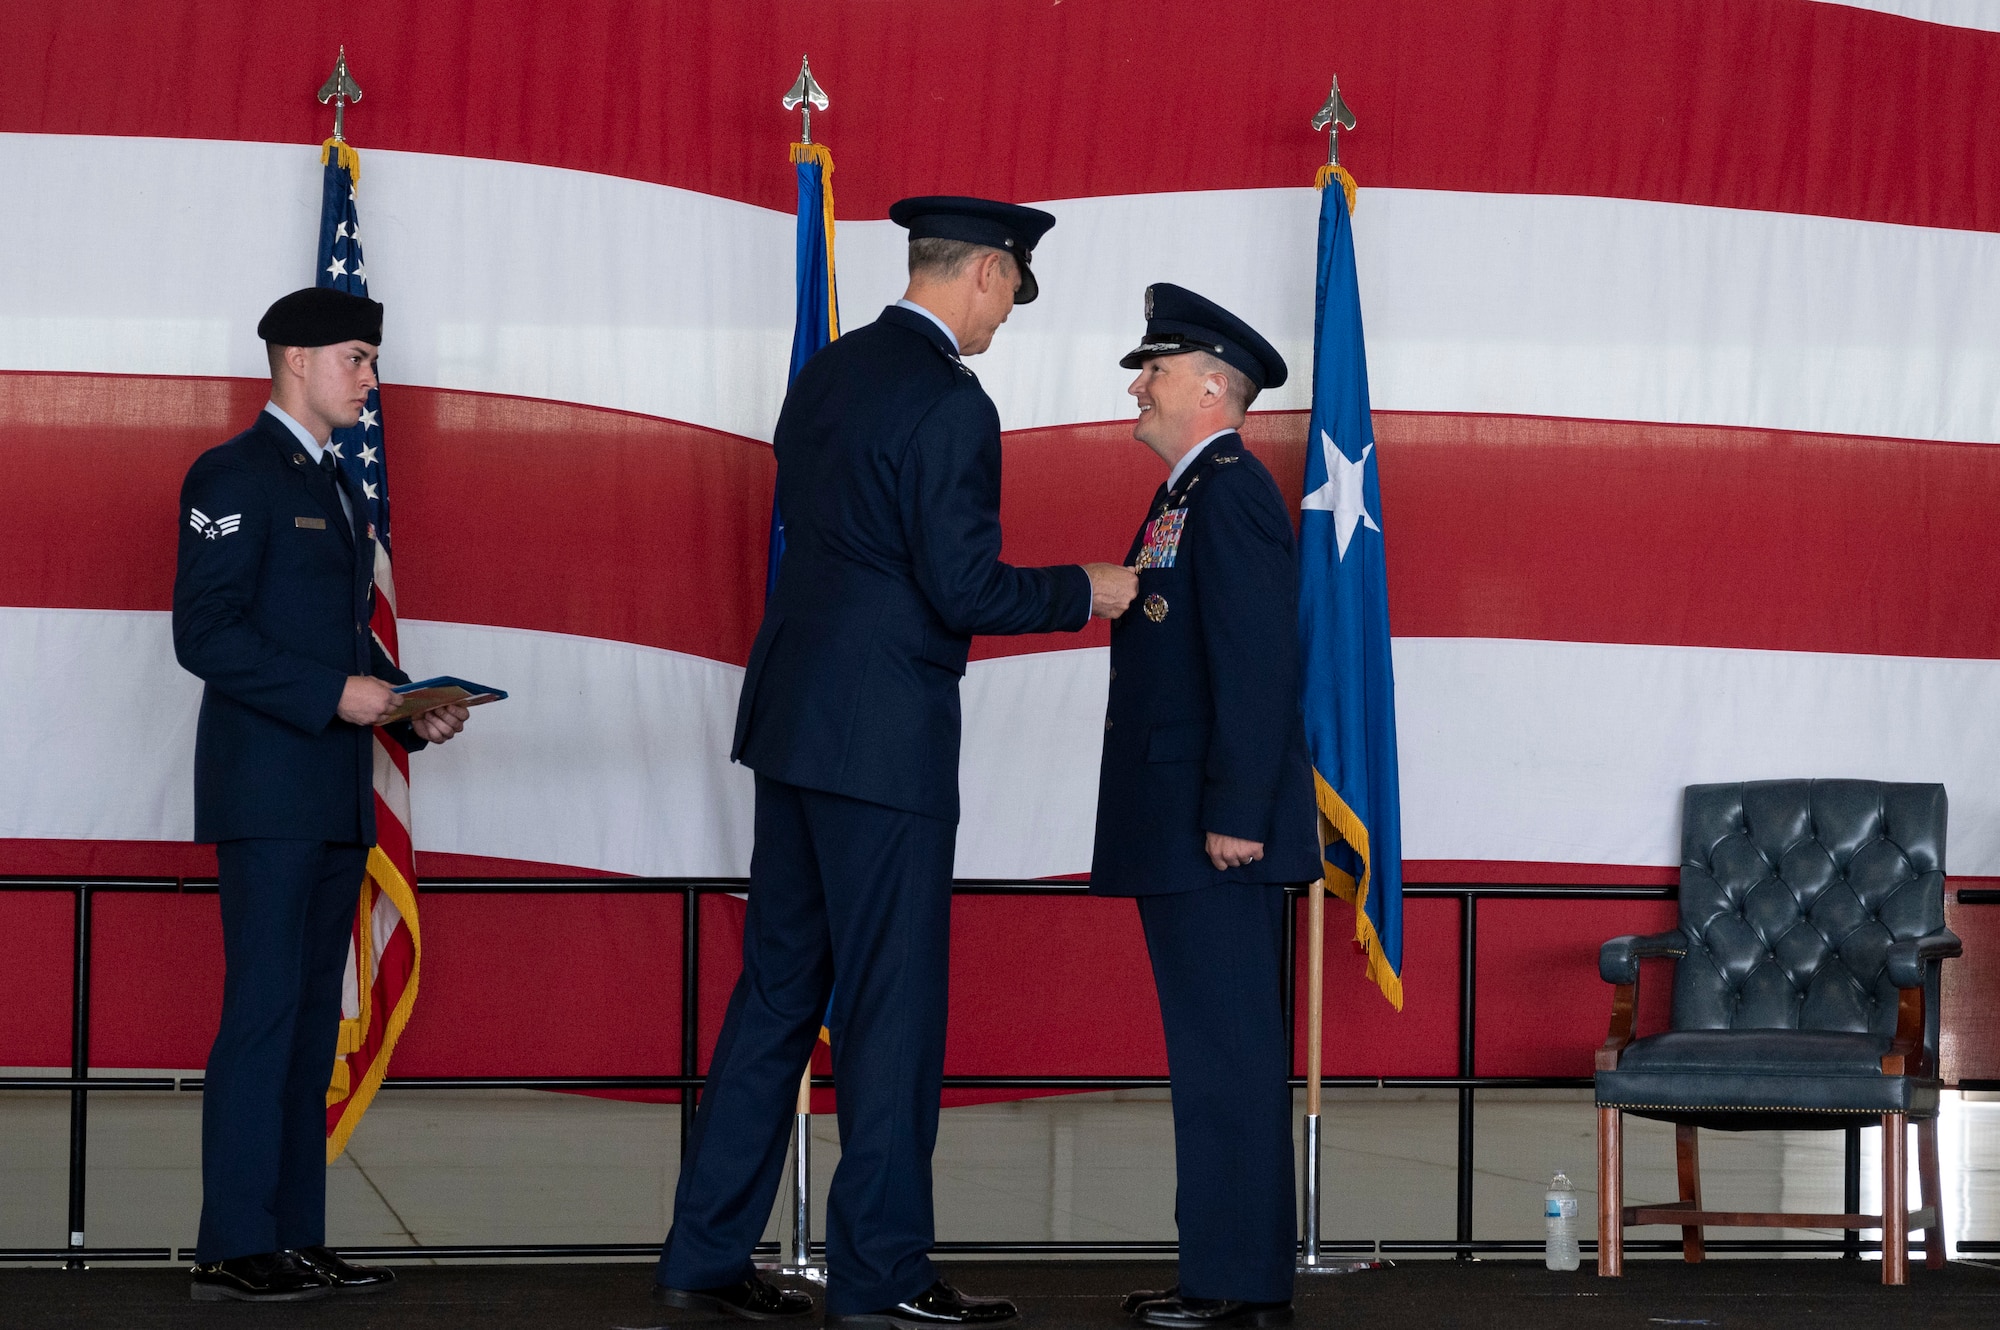 U.S. Air Force Maj. Gen. Craig Wills, 19th Air Force commander, presents a Legion of Merit medal to Col. Craig Prather, former 47th Flying Training Wing commander, during the 47th Flying Training Wing change of command ceremony at Laughlin Air Force Base, Texas, July 22, 2022. The Legion of Merit is a military award of the United States Armed Forces that is given for exceptionally meritorious conduct in the performance of outstanding services and achievements. (U.S. Air Force photo by Airman 1st Class Kailee Reynolds)